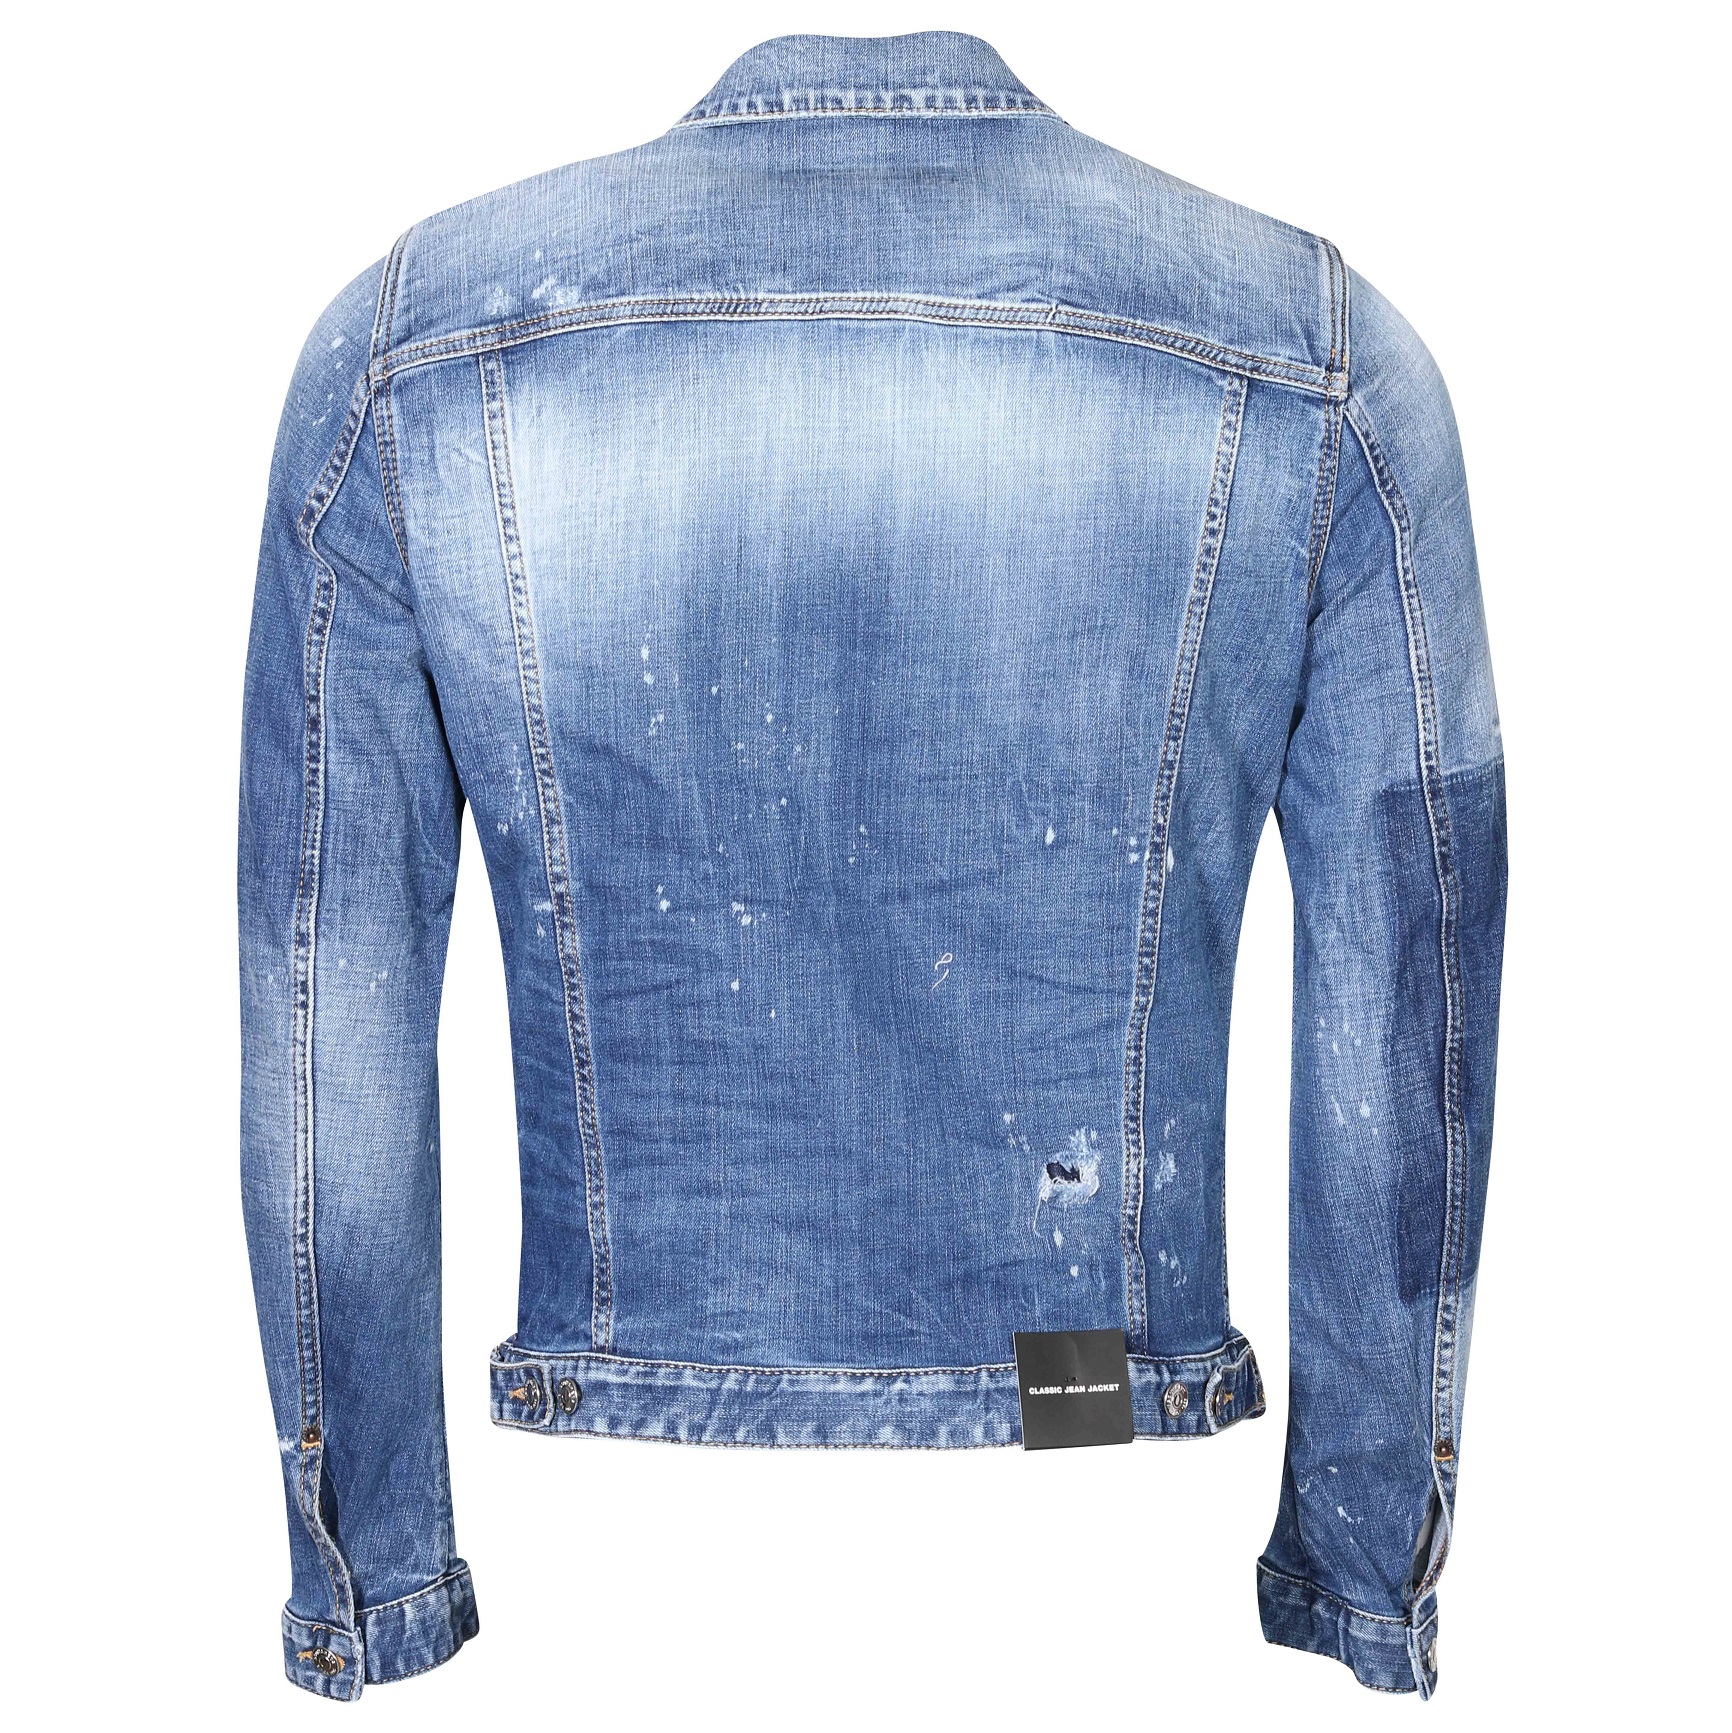 DSQUARED2 Classic Denim Jacket in Washed Light Blue 52